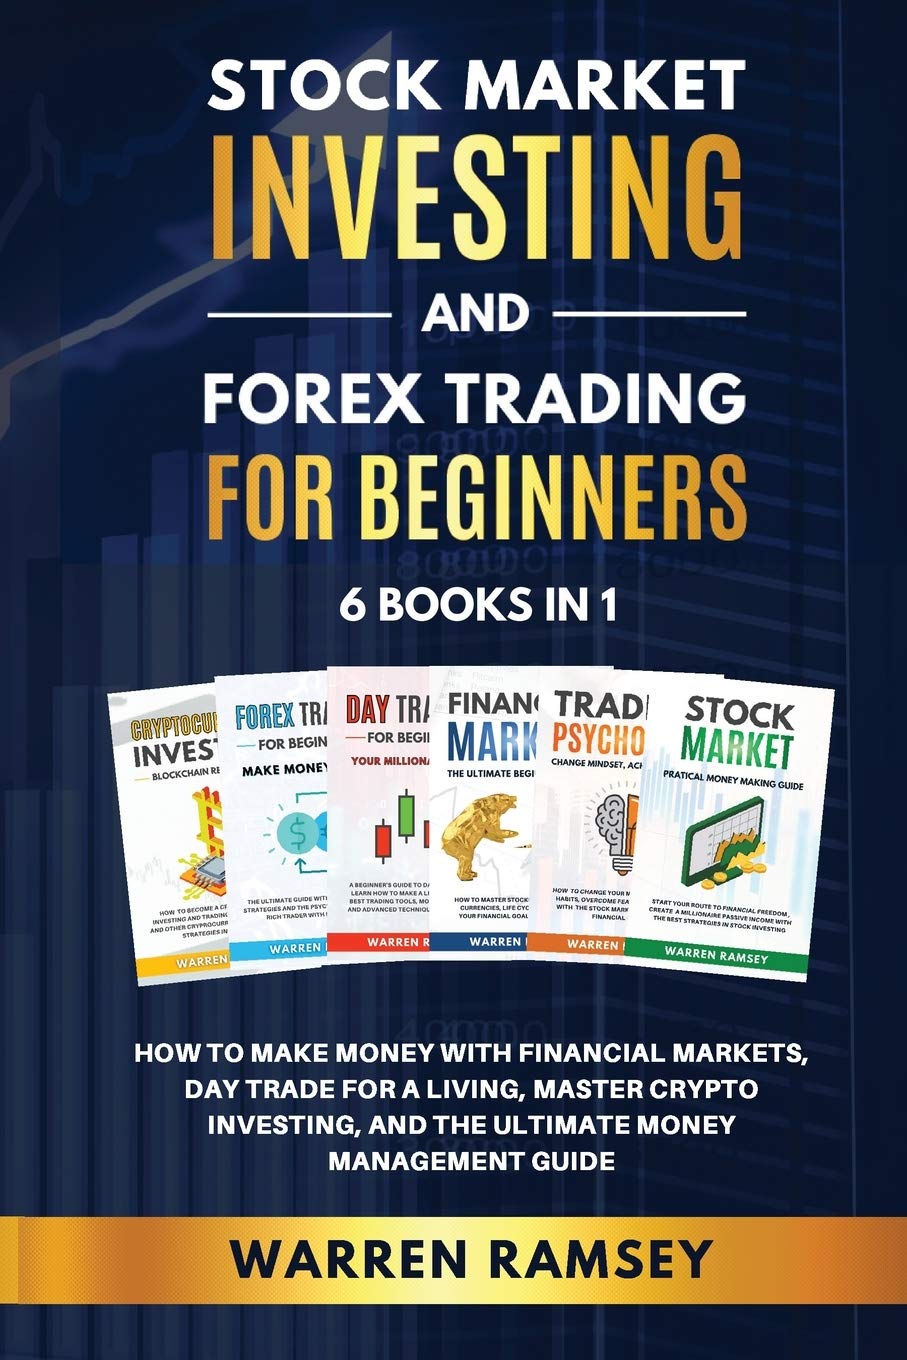 STOCK MARKET INVESTING AND FOREX TRADING FOR BEGINNERS 6 BOOKS IN 1